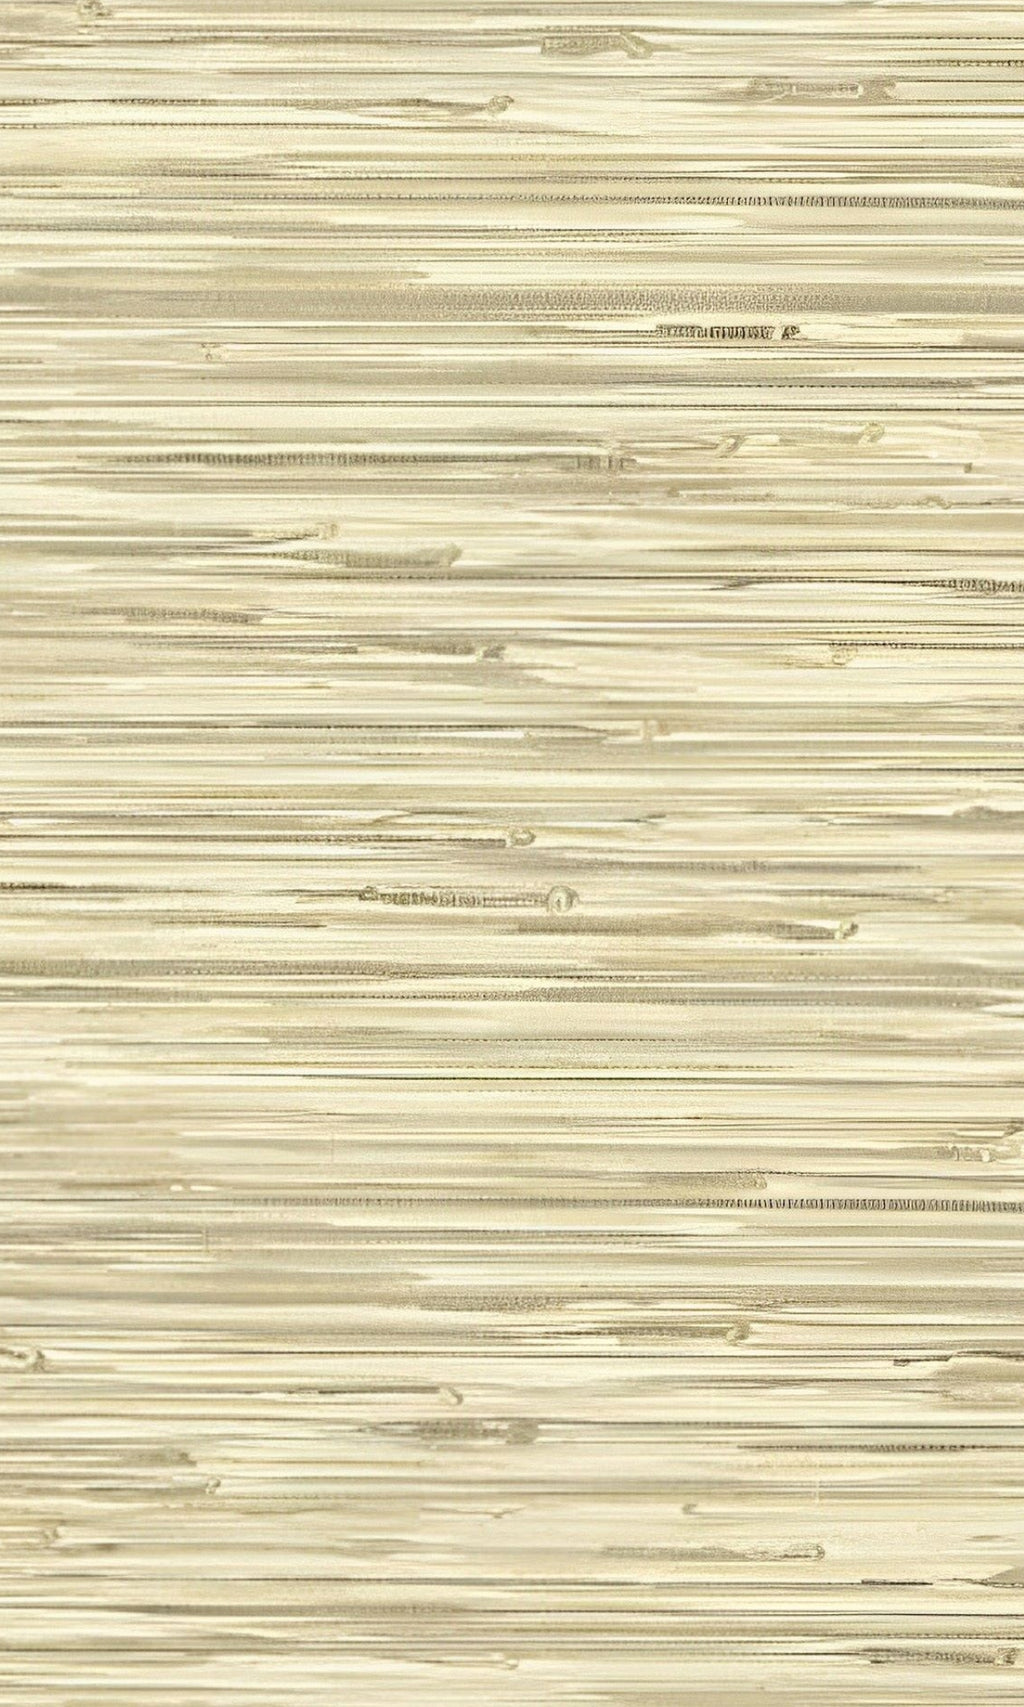 Spanish Moss Grasscloth Inspired Vinyl Commercial CPW1067